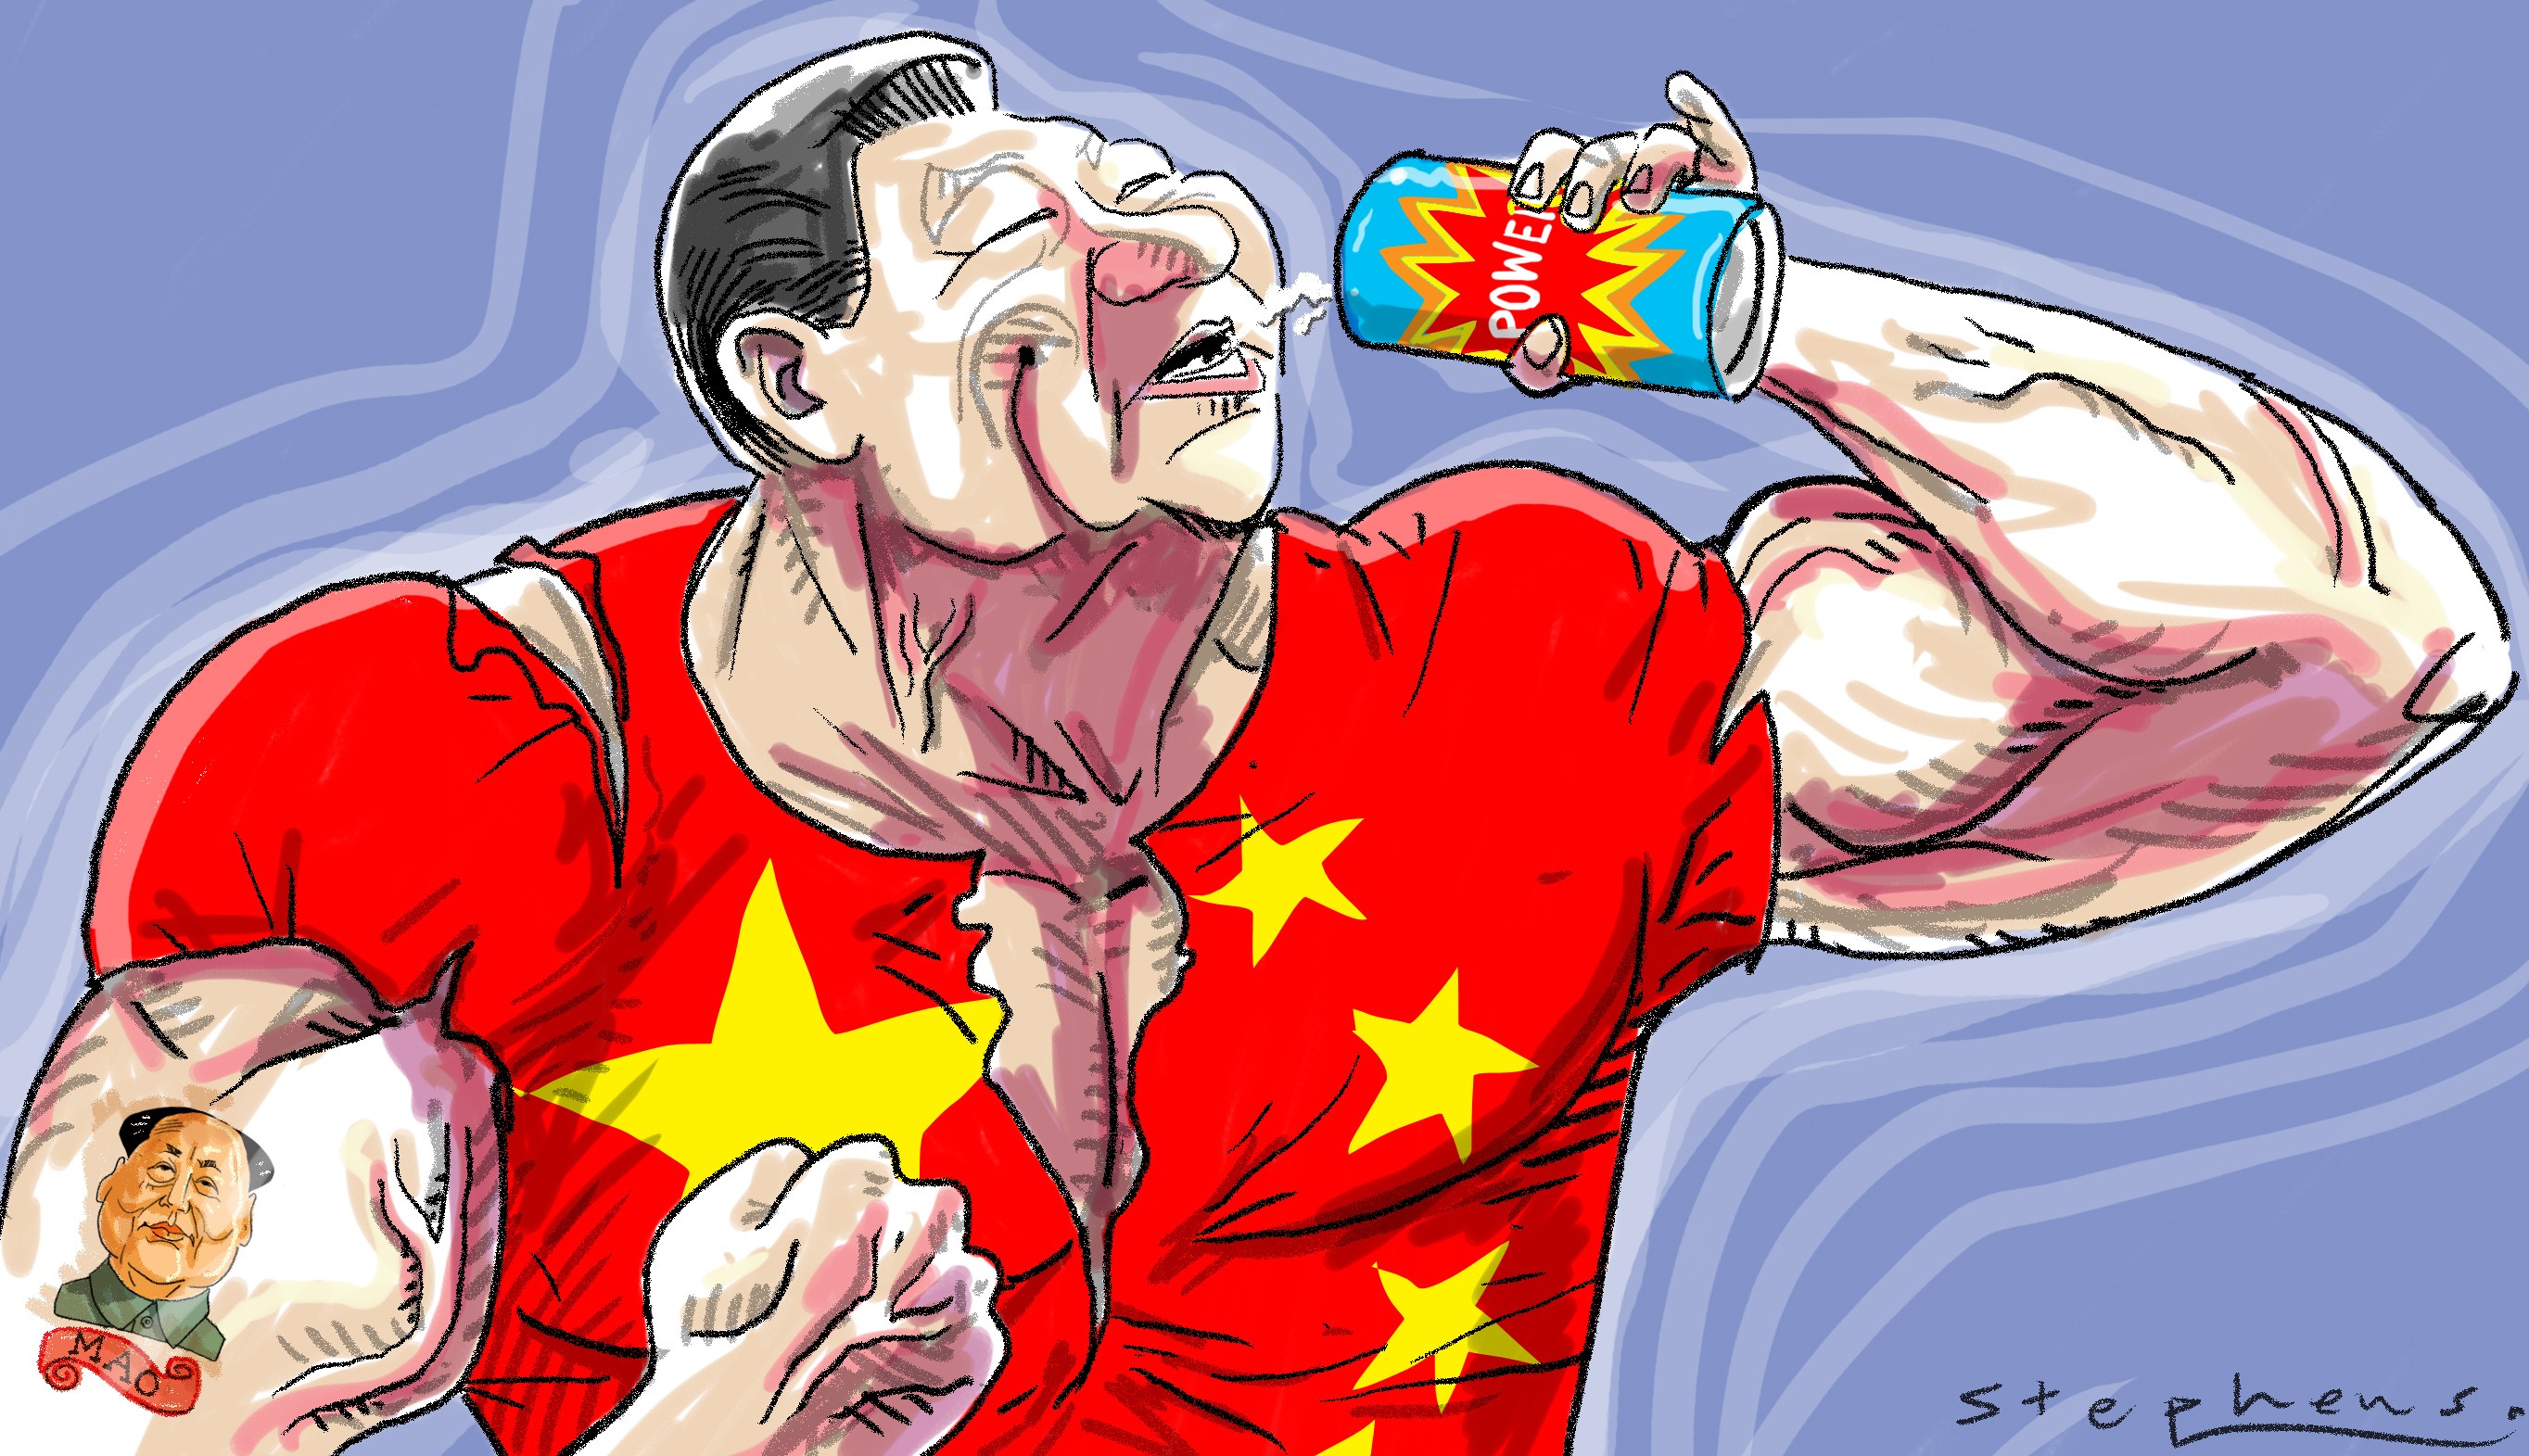 President Xi Jinping’s actions and the clear concentration of power in himself reveal a return to the patriarchal mode of strongman politics that was characteristic of the Mao era. Illustration: Craig Stephens